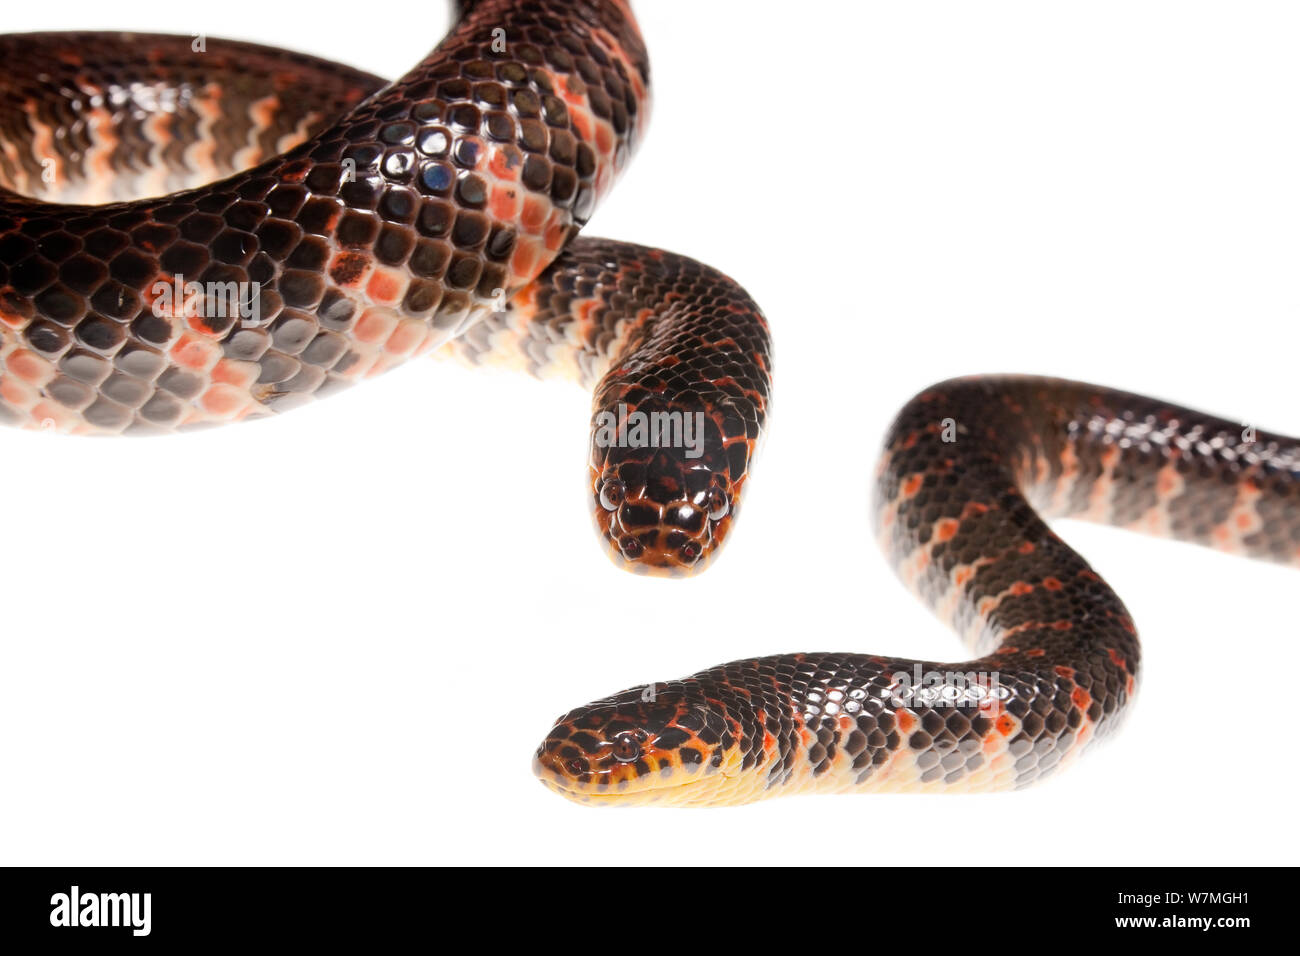 Eastern mud snake (Farancia abacura abacura) two snakes, Everglades National Park, Florida, USA, May. meetyourneighbours.net project Stock Photo